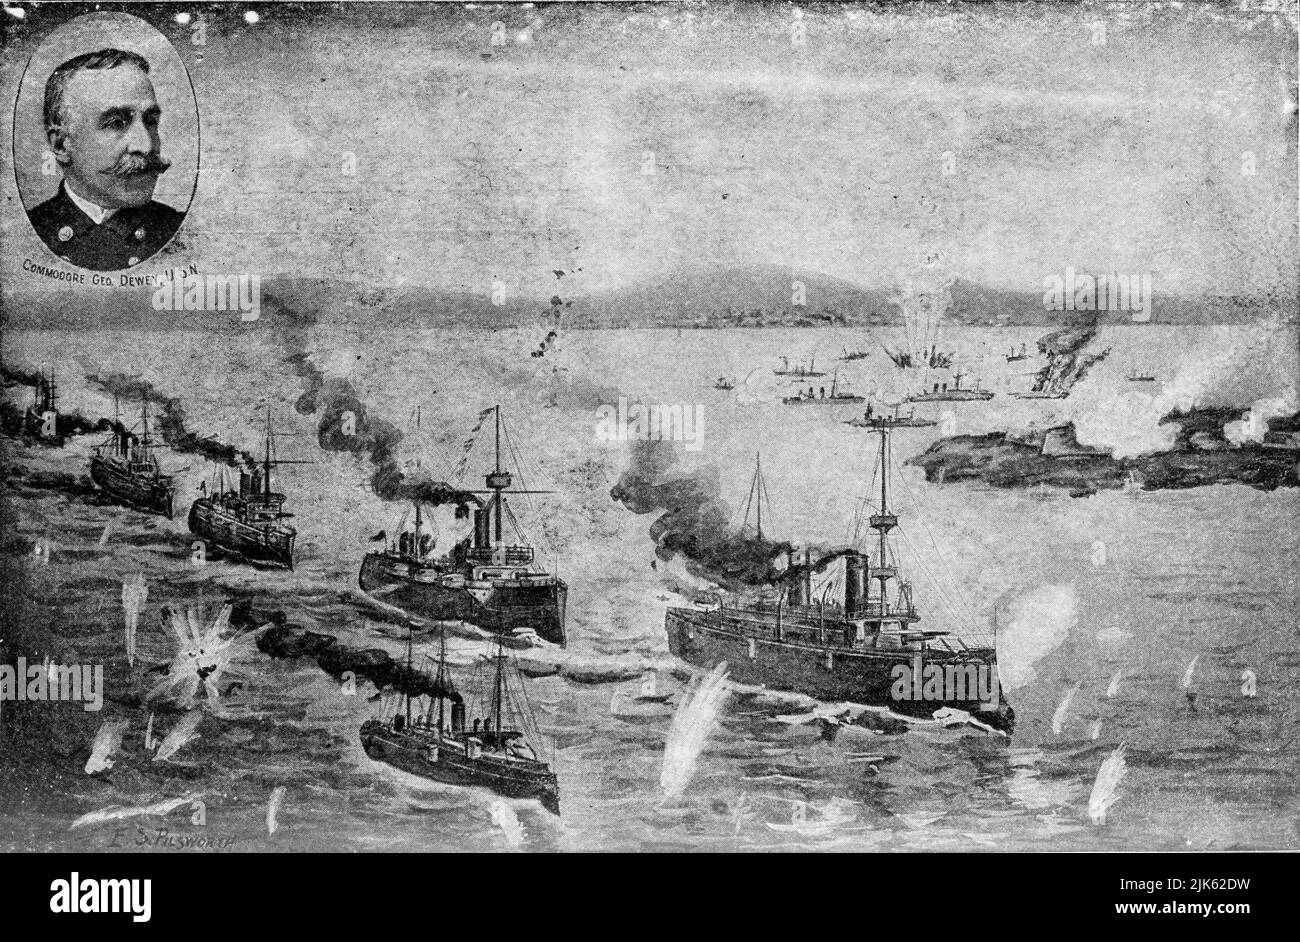 The Battle of Manila, sometimes called the Mock Battle of Manila,[1] was a land engagement which took place in Manila on August 13, 1898, at the end of the Spanish–American War, four months after the decisive victory by Commodore Dewey's Asiatic Squadron at the Battle of Manila Bay. (Wikipedia) Published early 1900s. Stock Photo